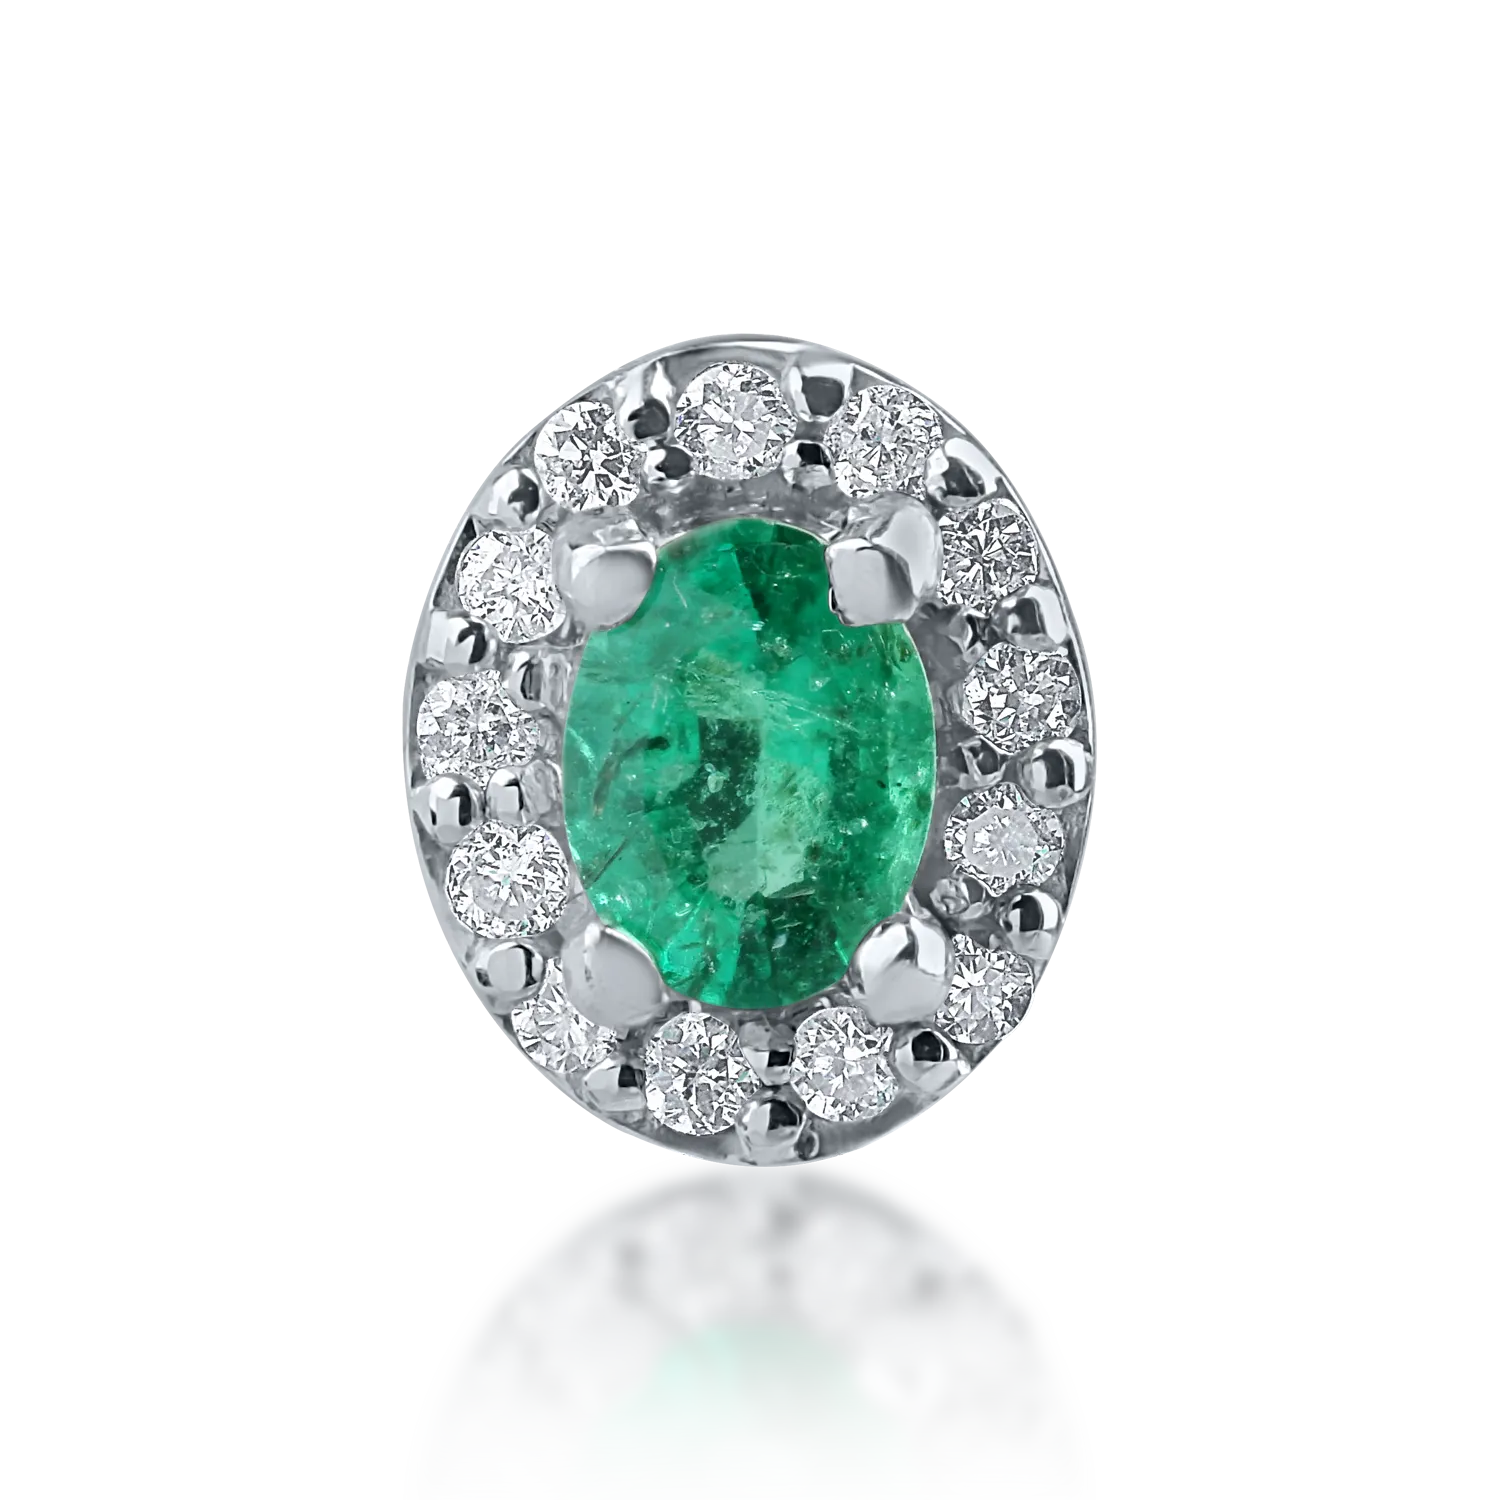 White gold pendant with 0.15ct emerald and 0.05ct diamonds